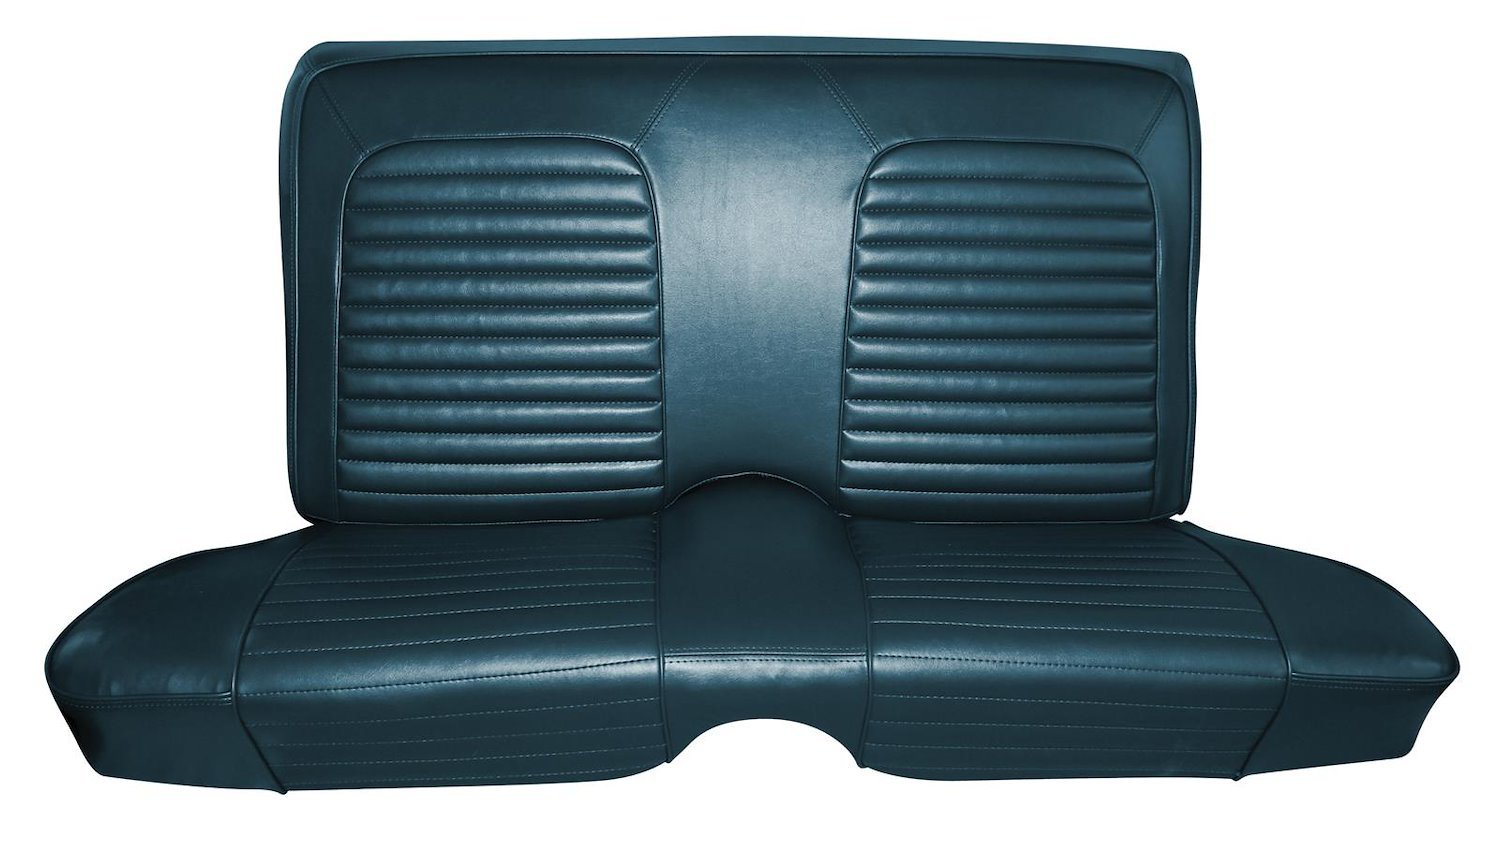 1967 Pontiac Firebird Standard and Deluxe and 1968-1969 Standard Interior with Optional Rear Folding Bench Seat Upholstery Set